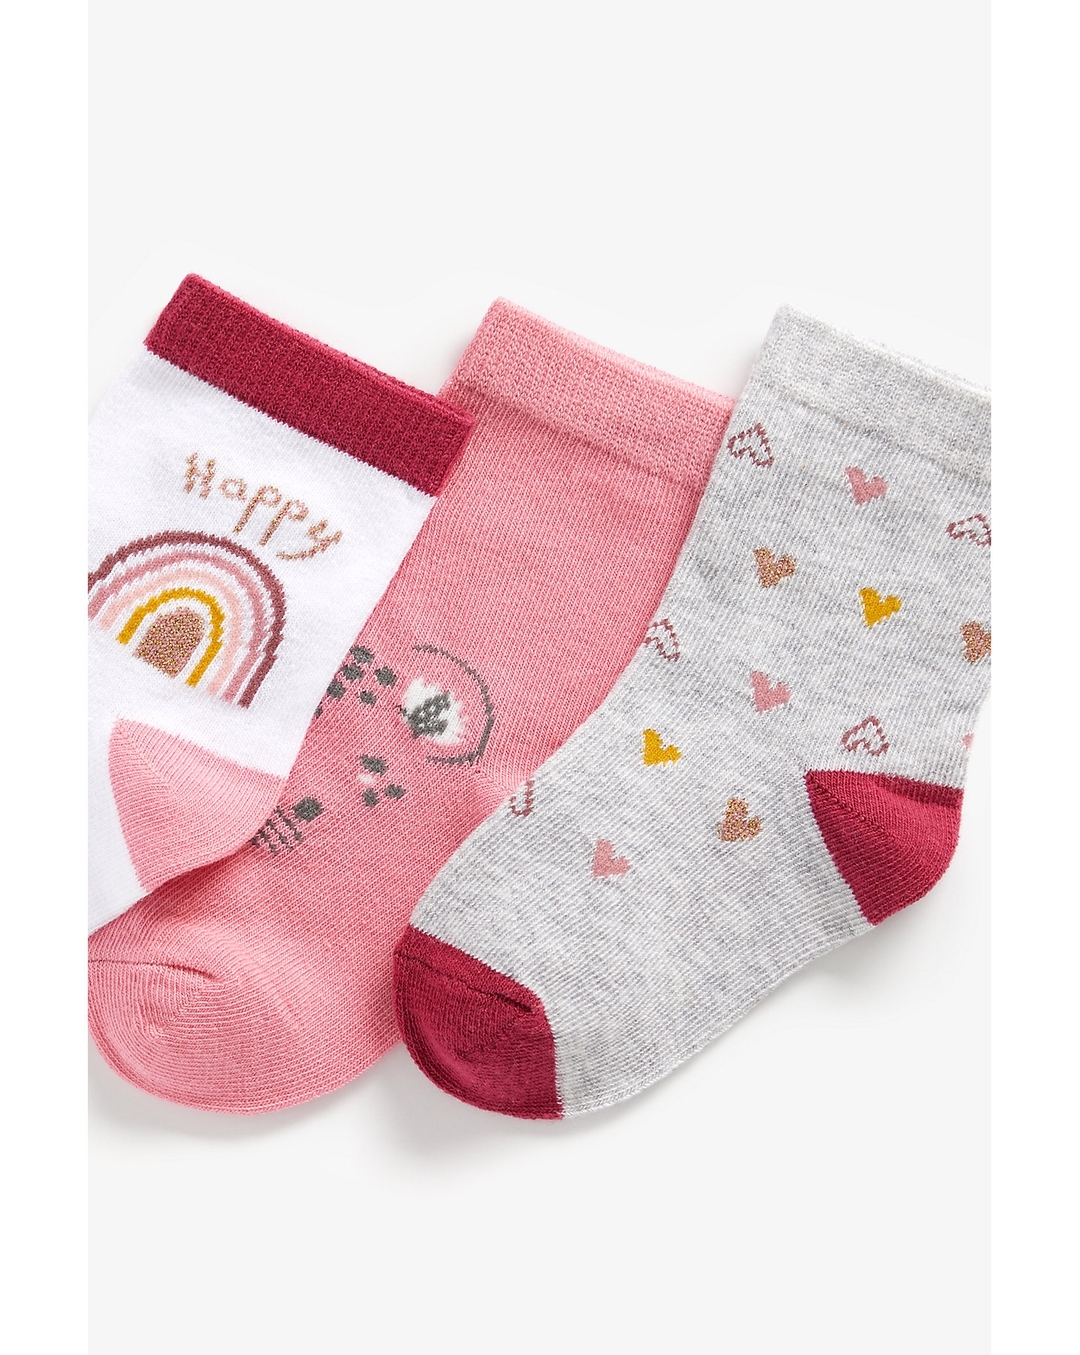 Buy Girls socks rainbow and heart deisgn - Pack of 3 - Pink Online